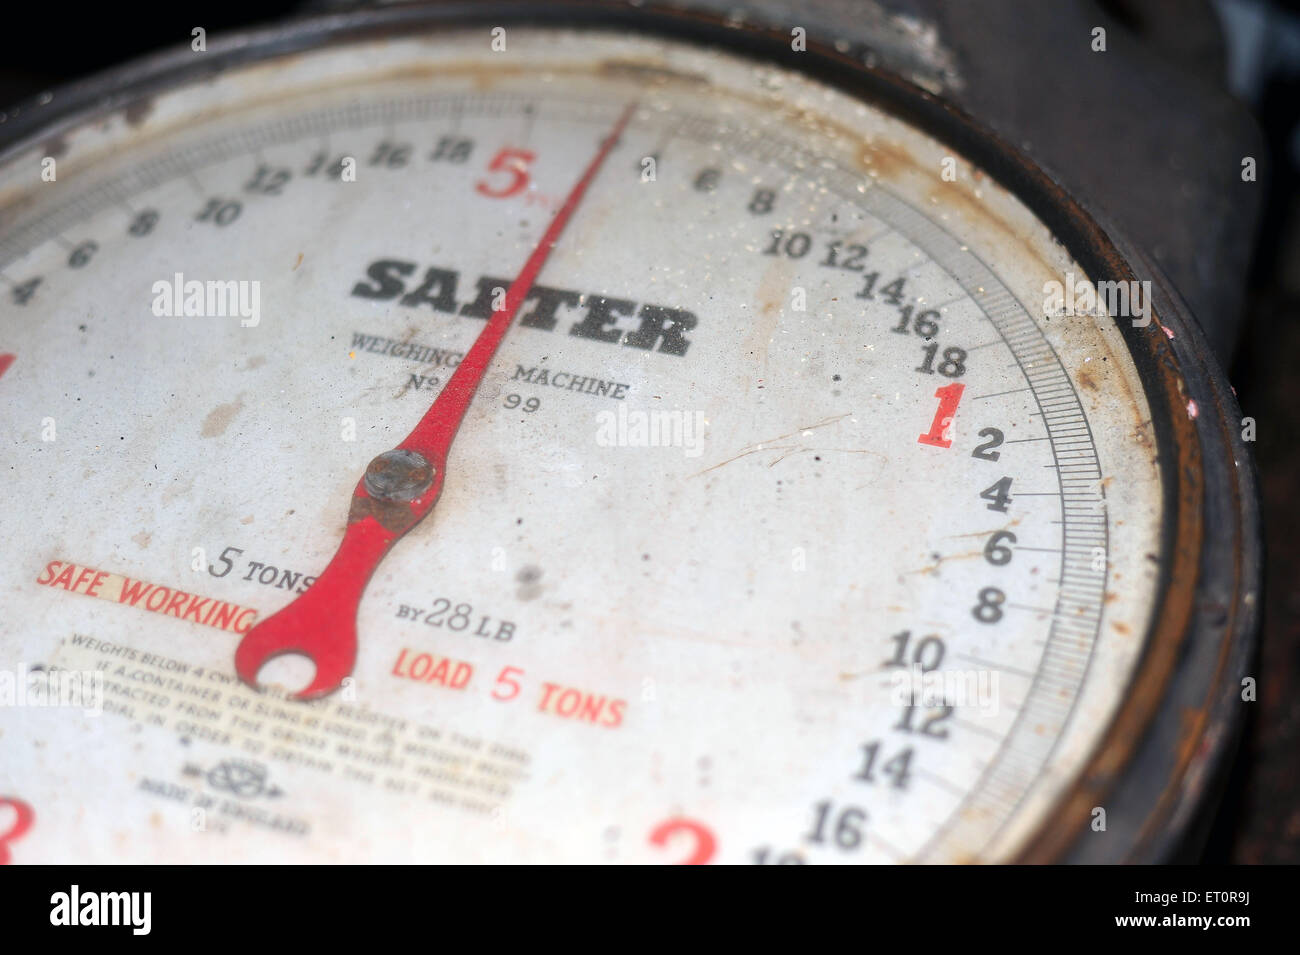 An industrial scale that measures up to 5 tons in the M Shed museum storehouse in Bristol. Stock Photo